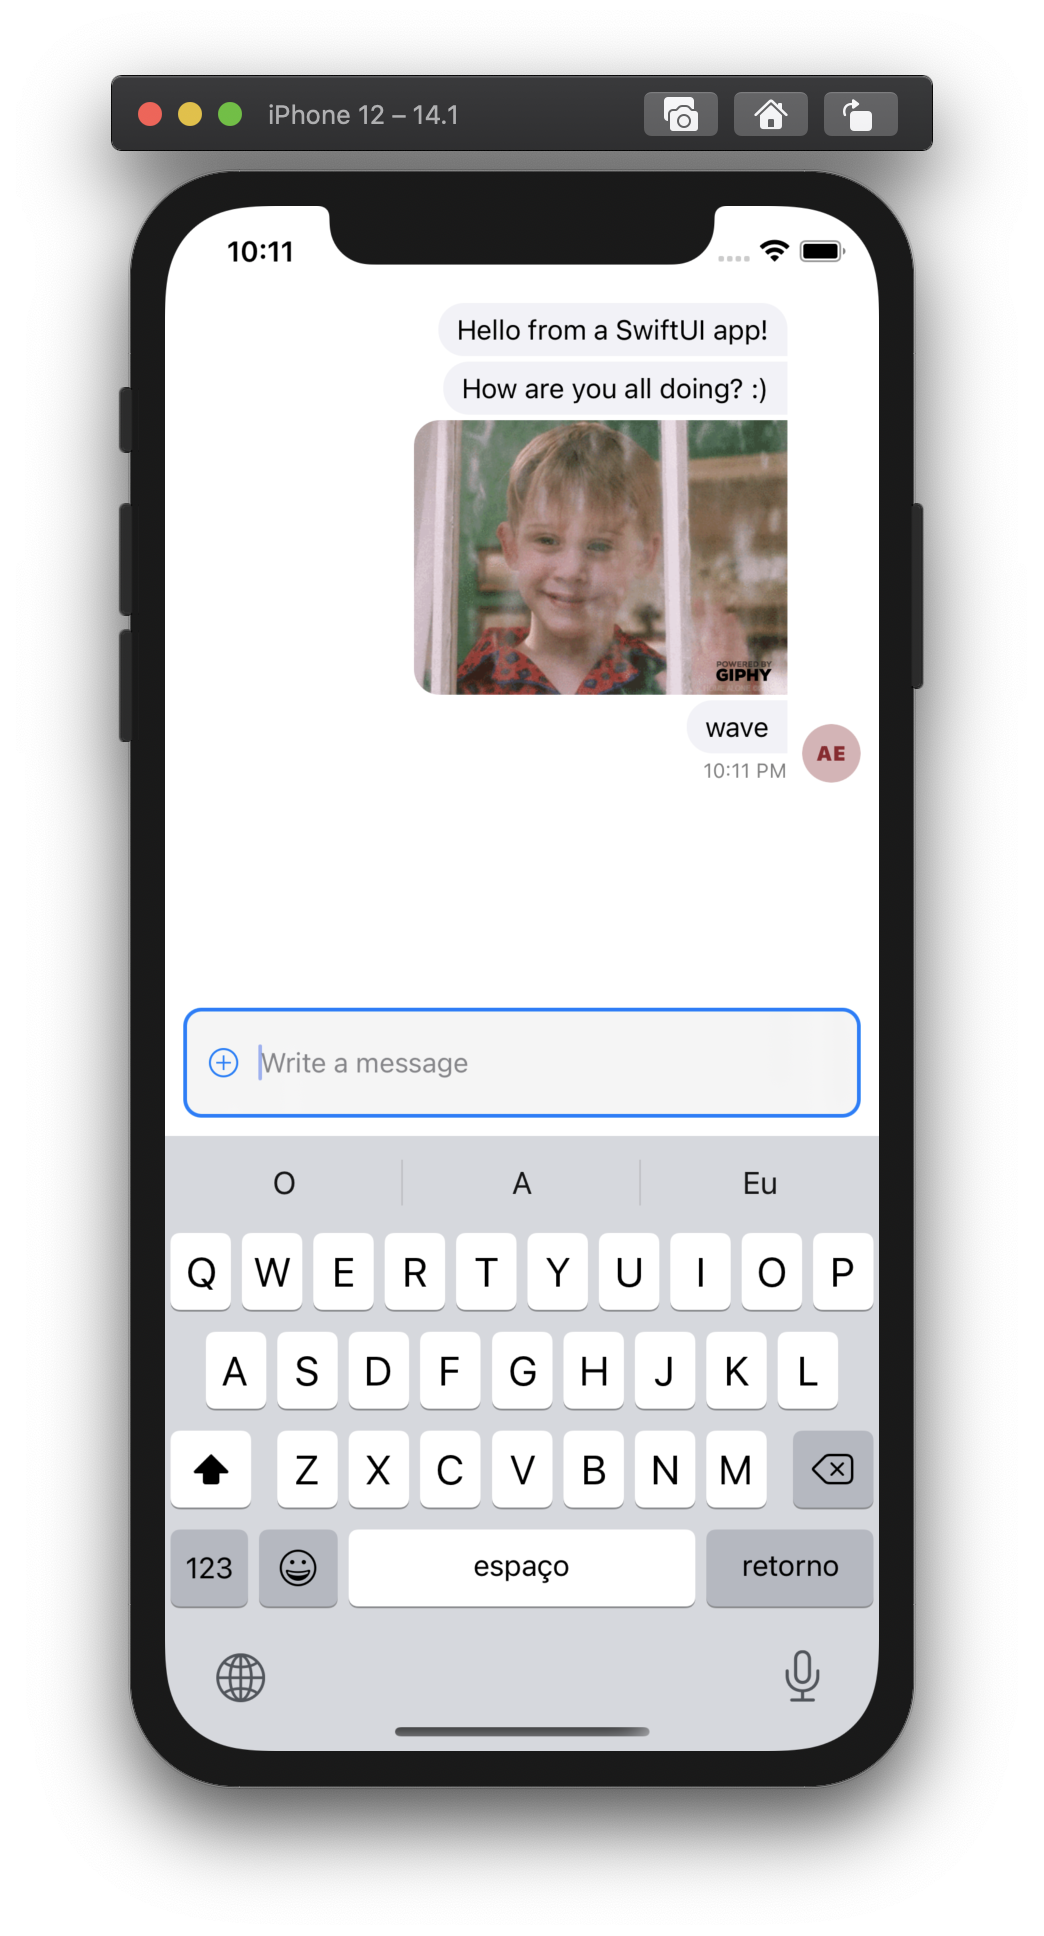 Image shows a chat screen running inside a SwiftUI app